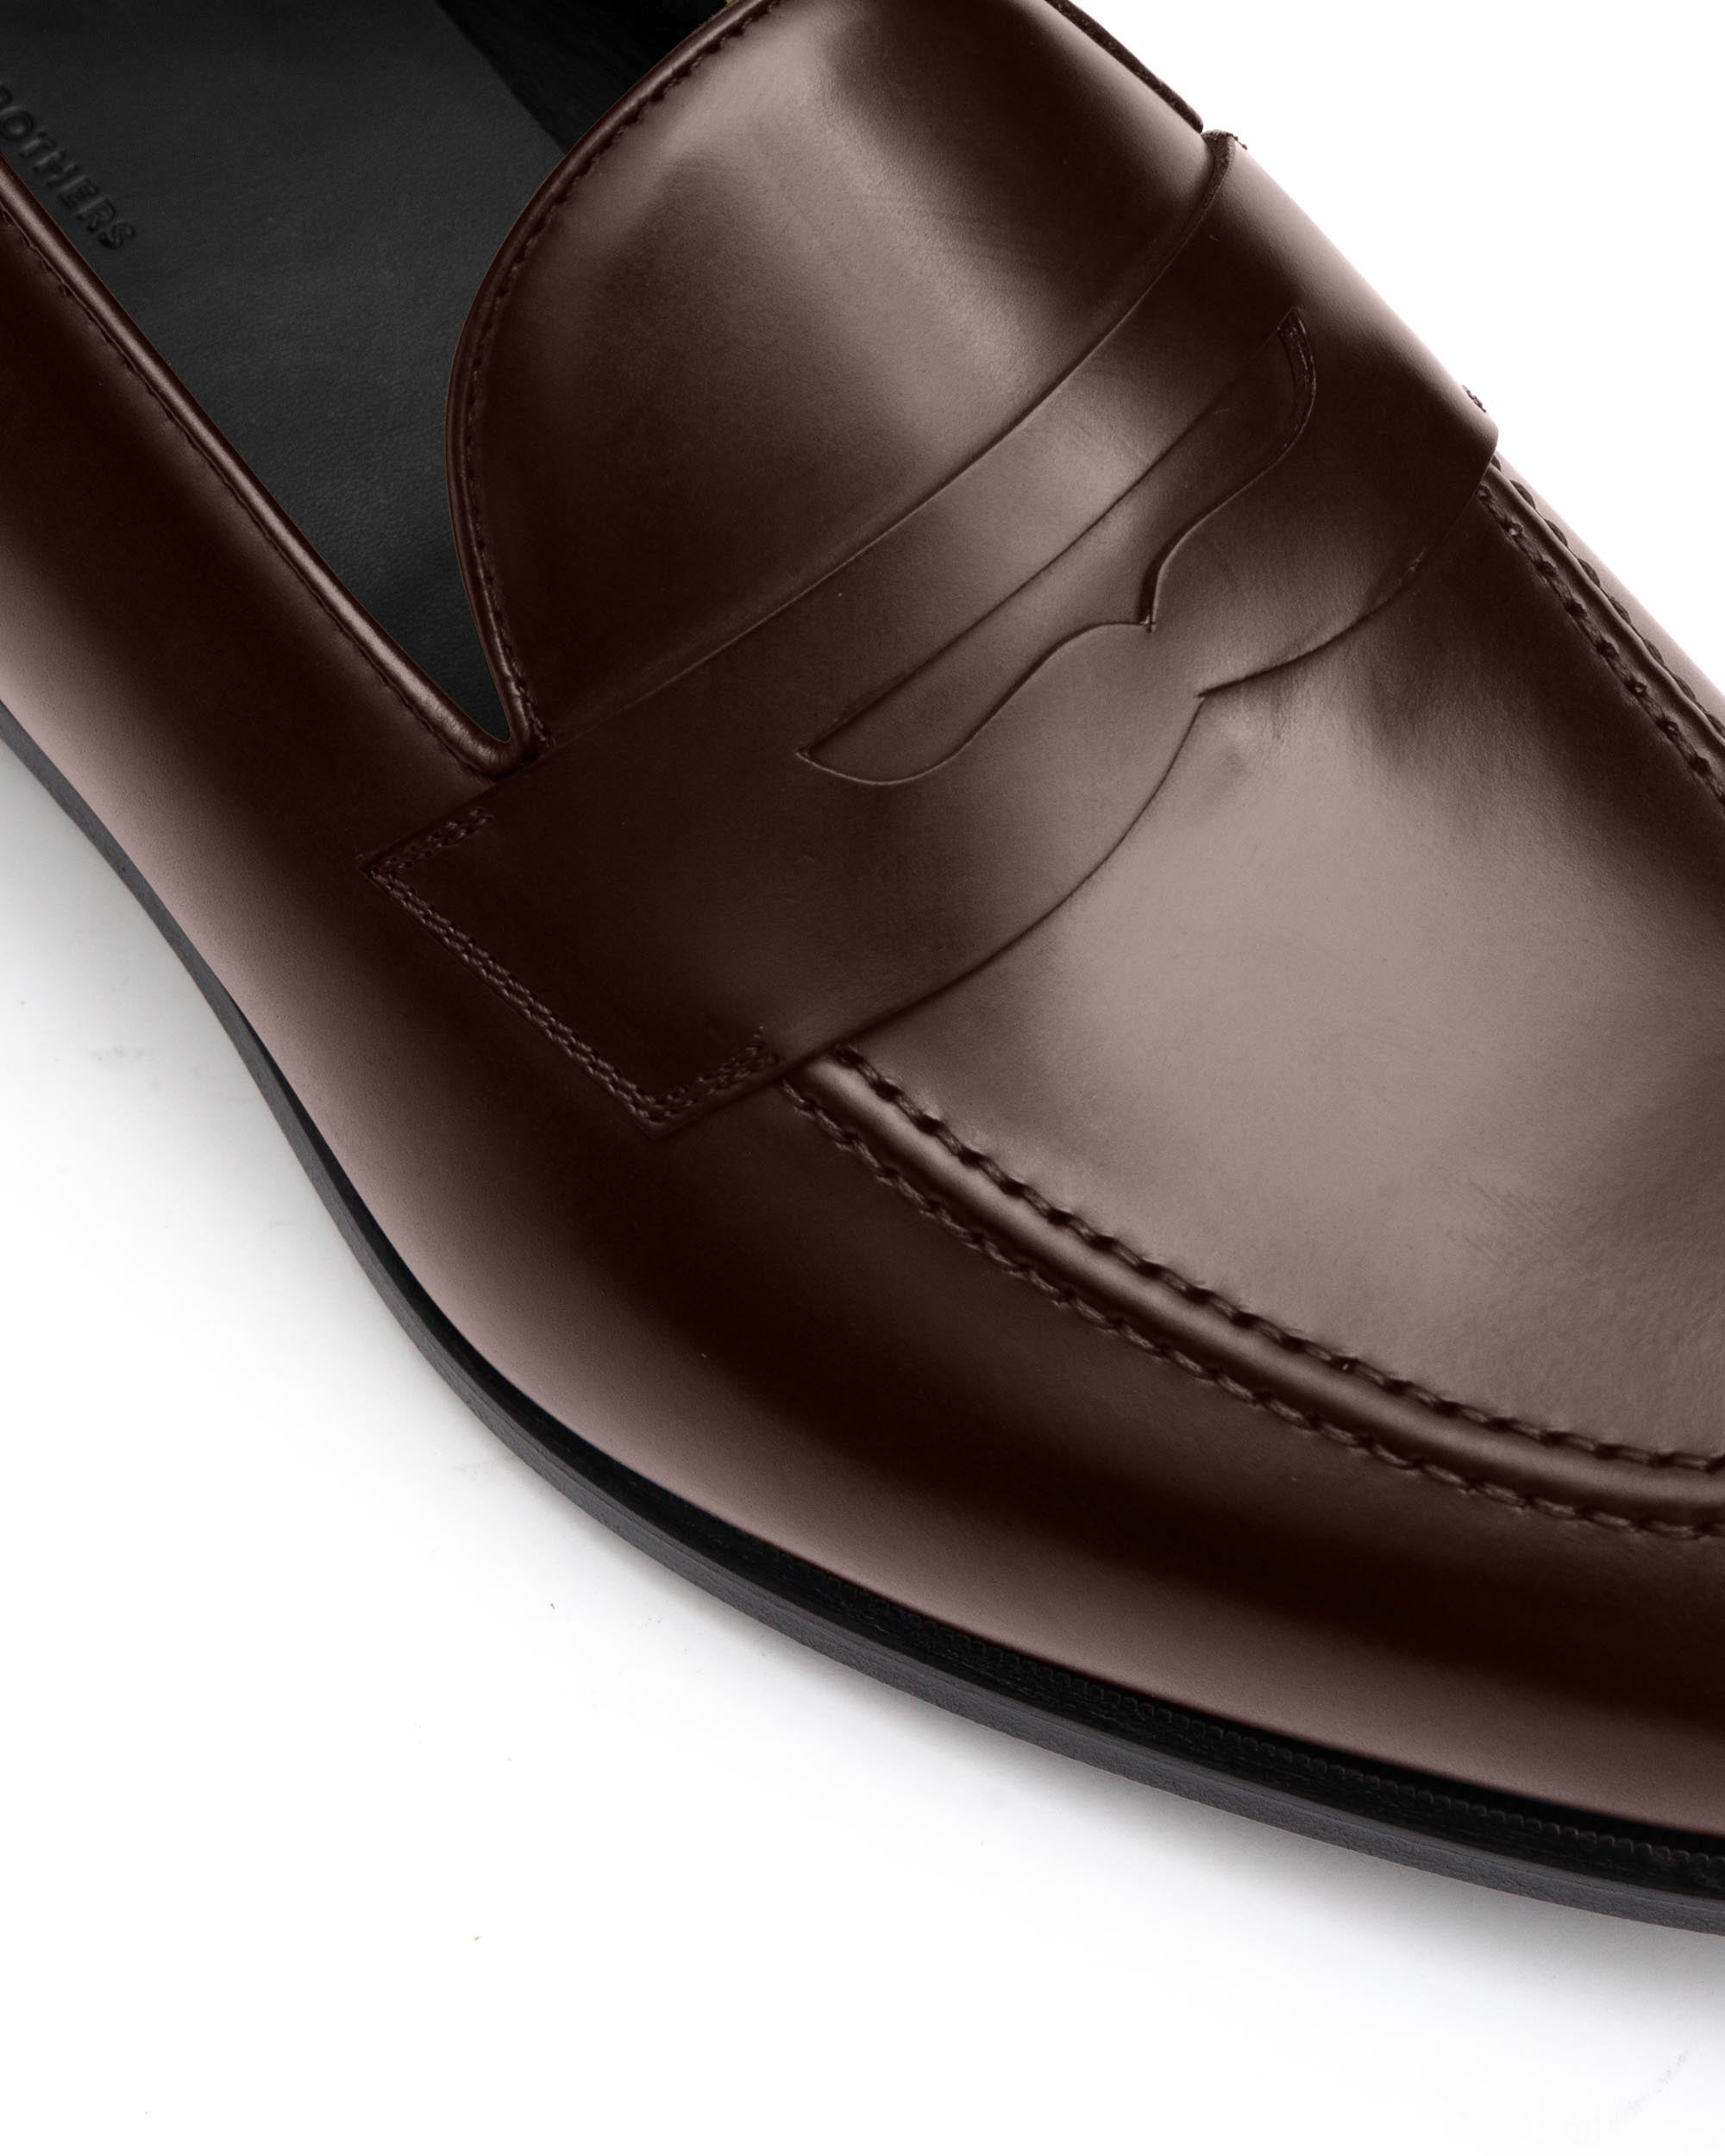 Polished Dark Brown Calf Leather Penny Loafer